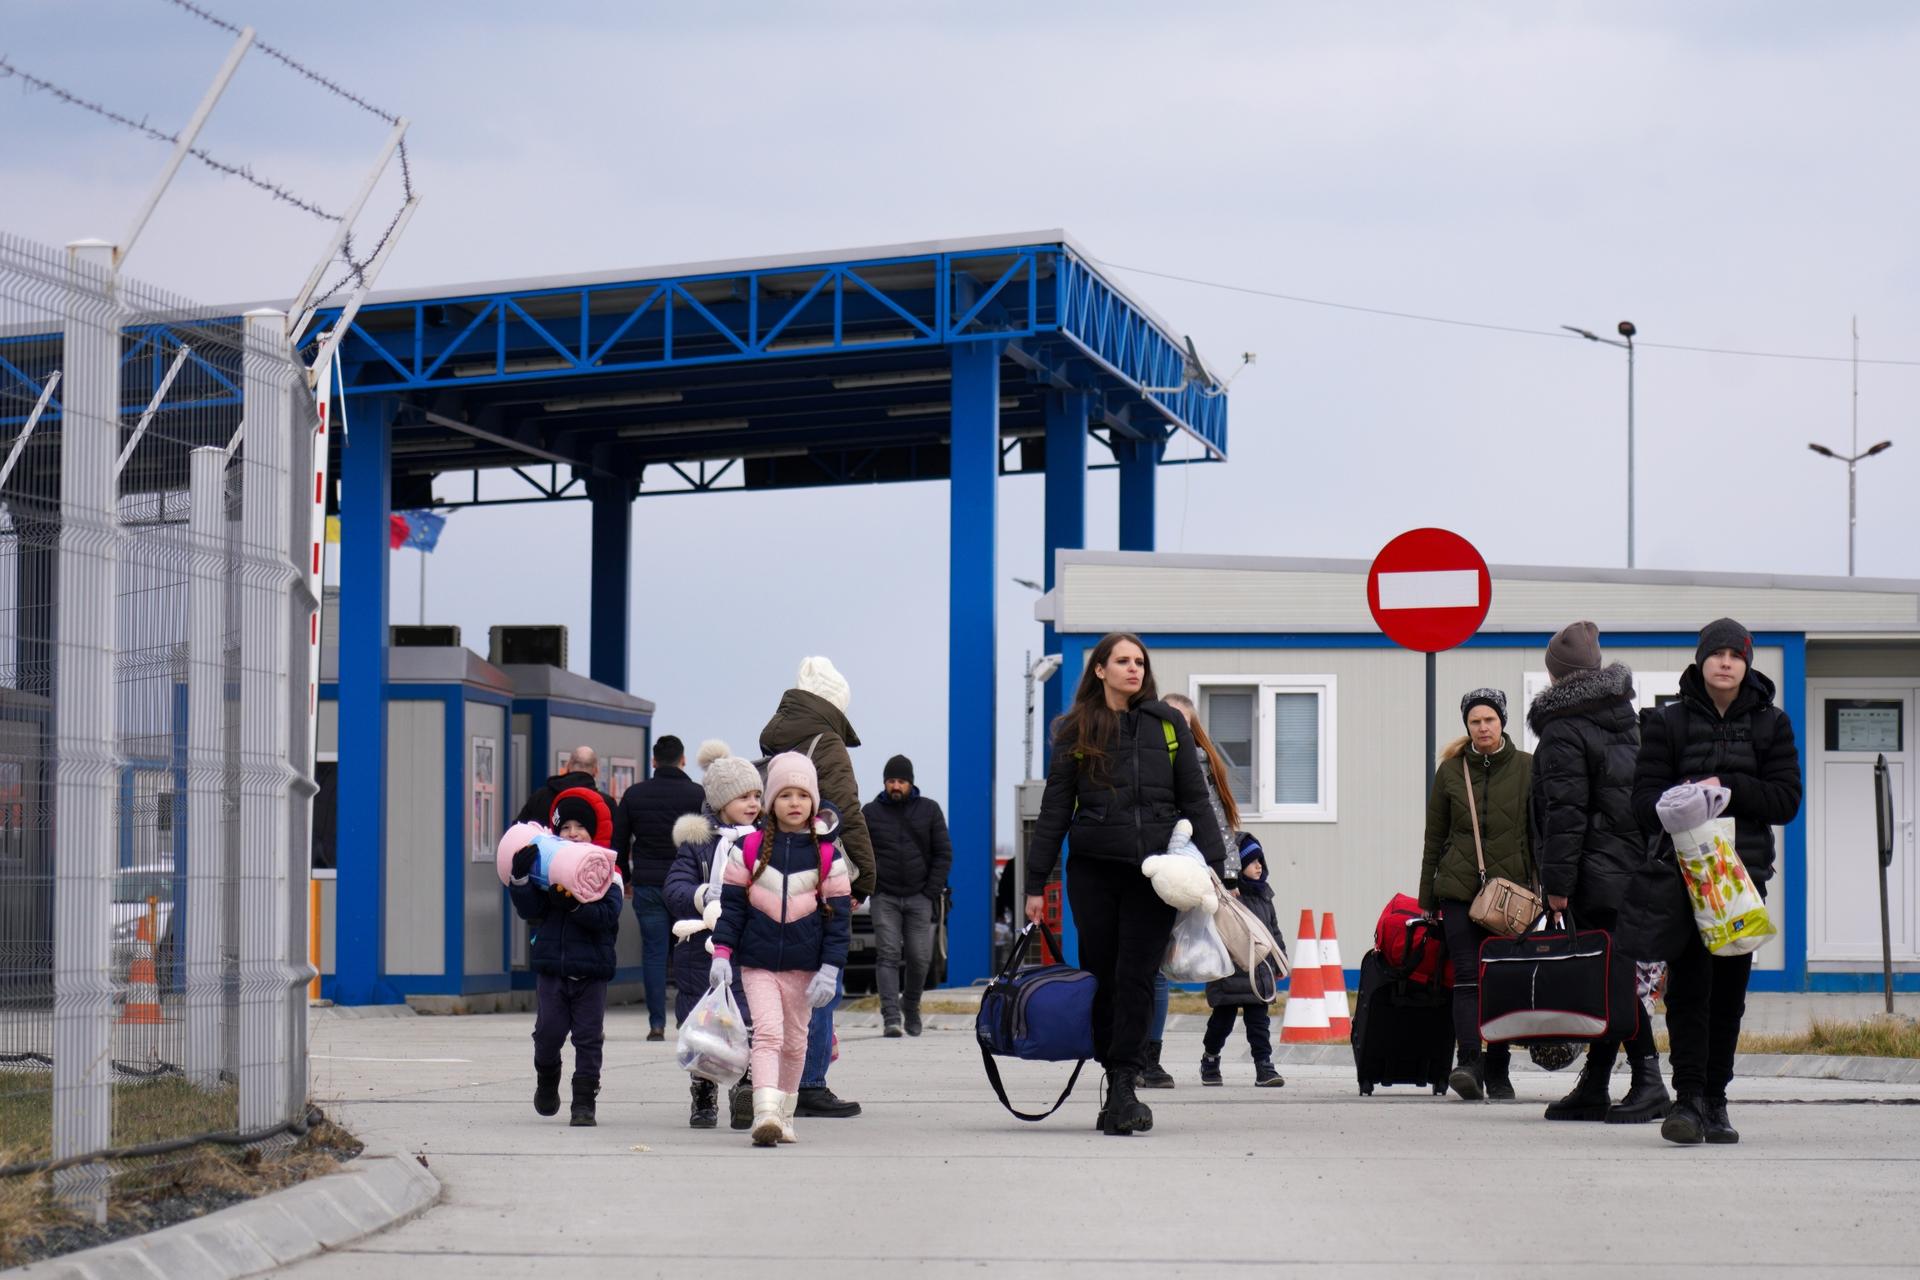 Romania has taken in about 82,000 refugees, and its neighbor Moldova has taken in the name number. In Isaccea, alone, on Romania’s southern border, thousands are arriving from Ukraine.